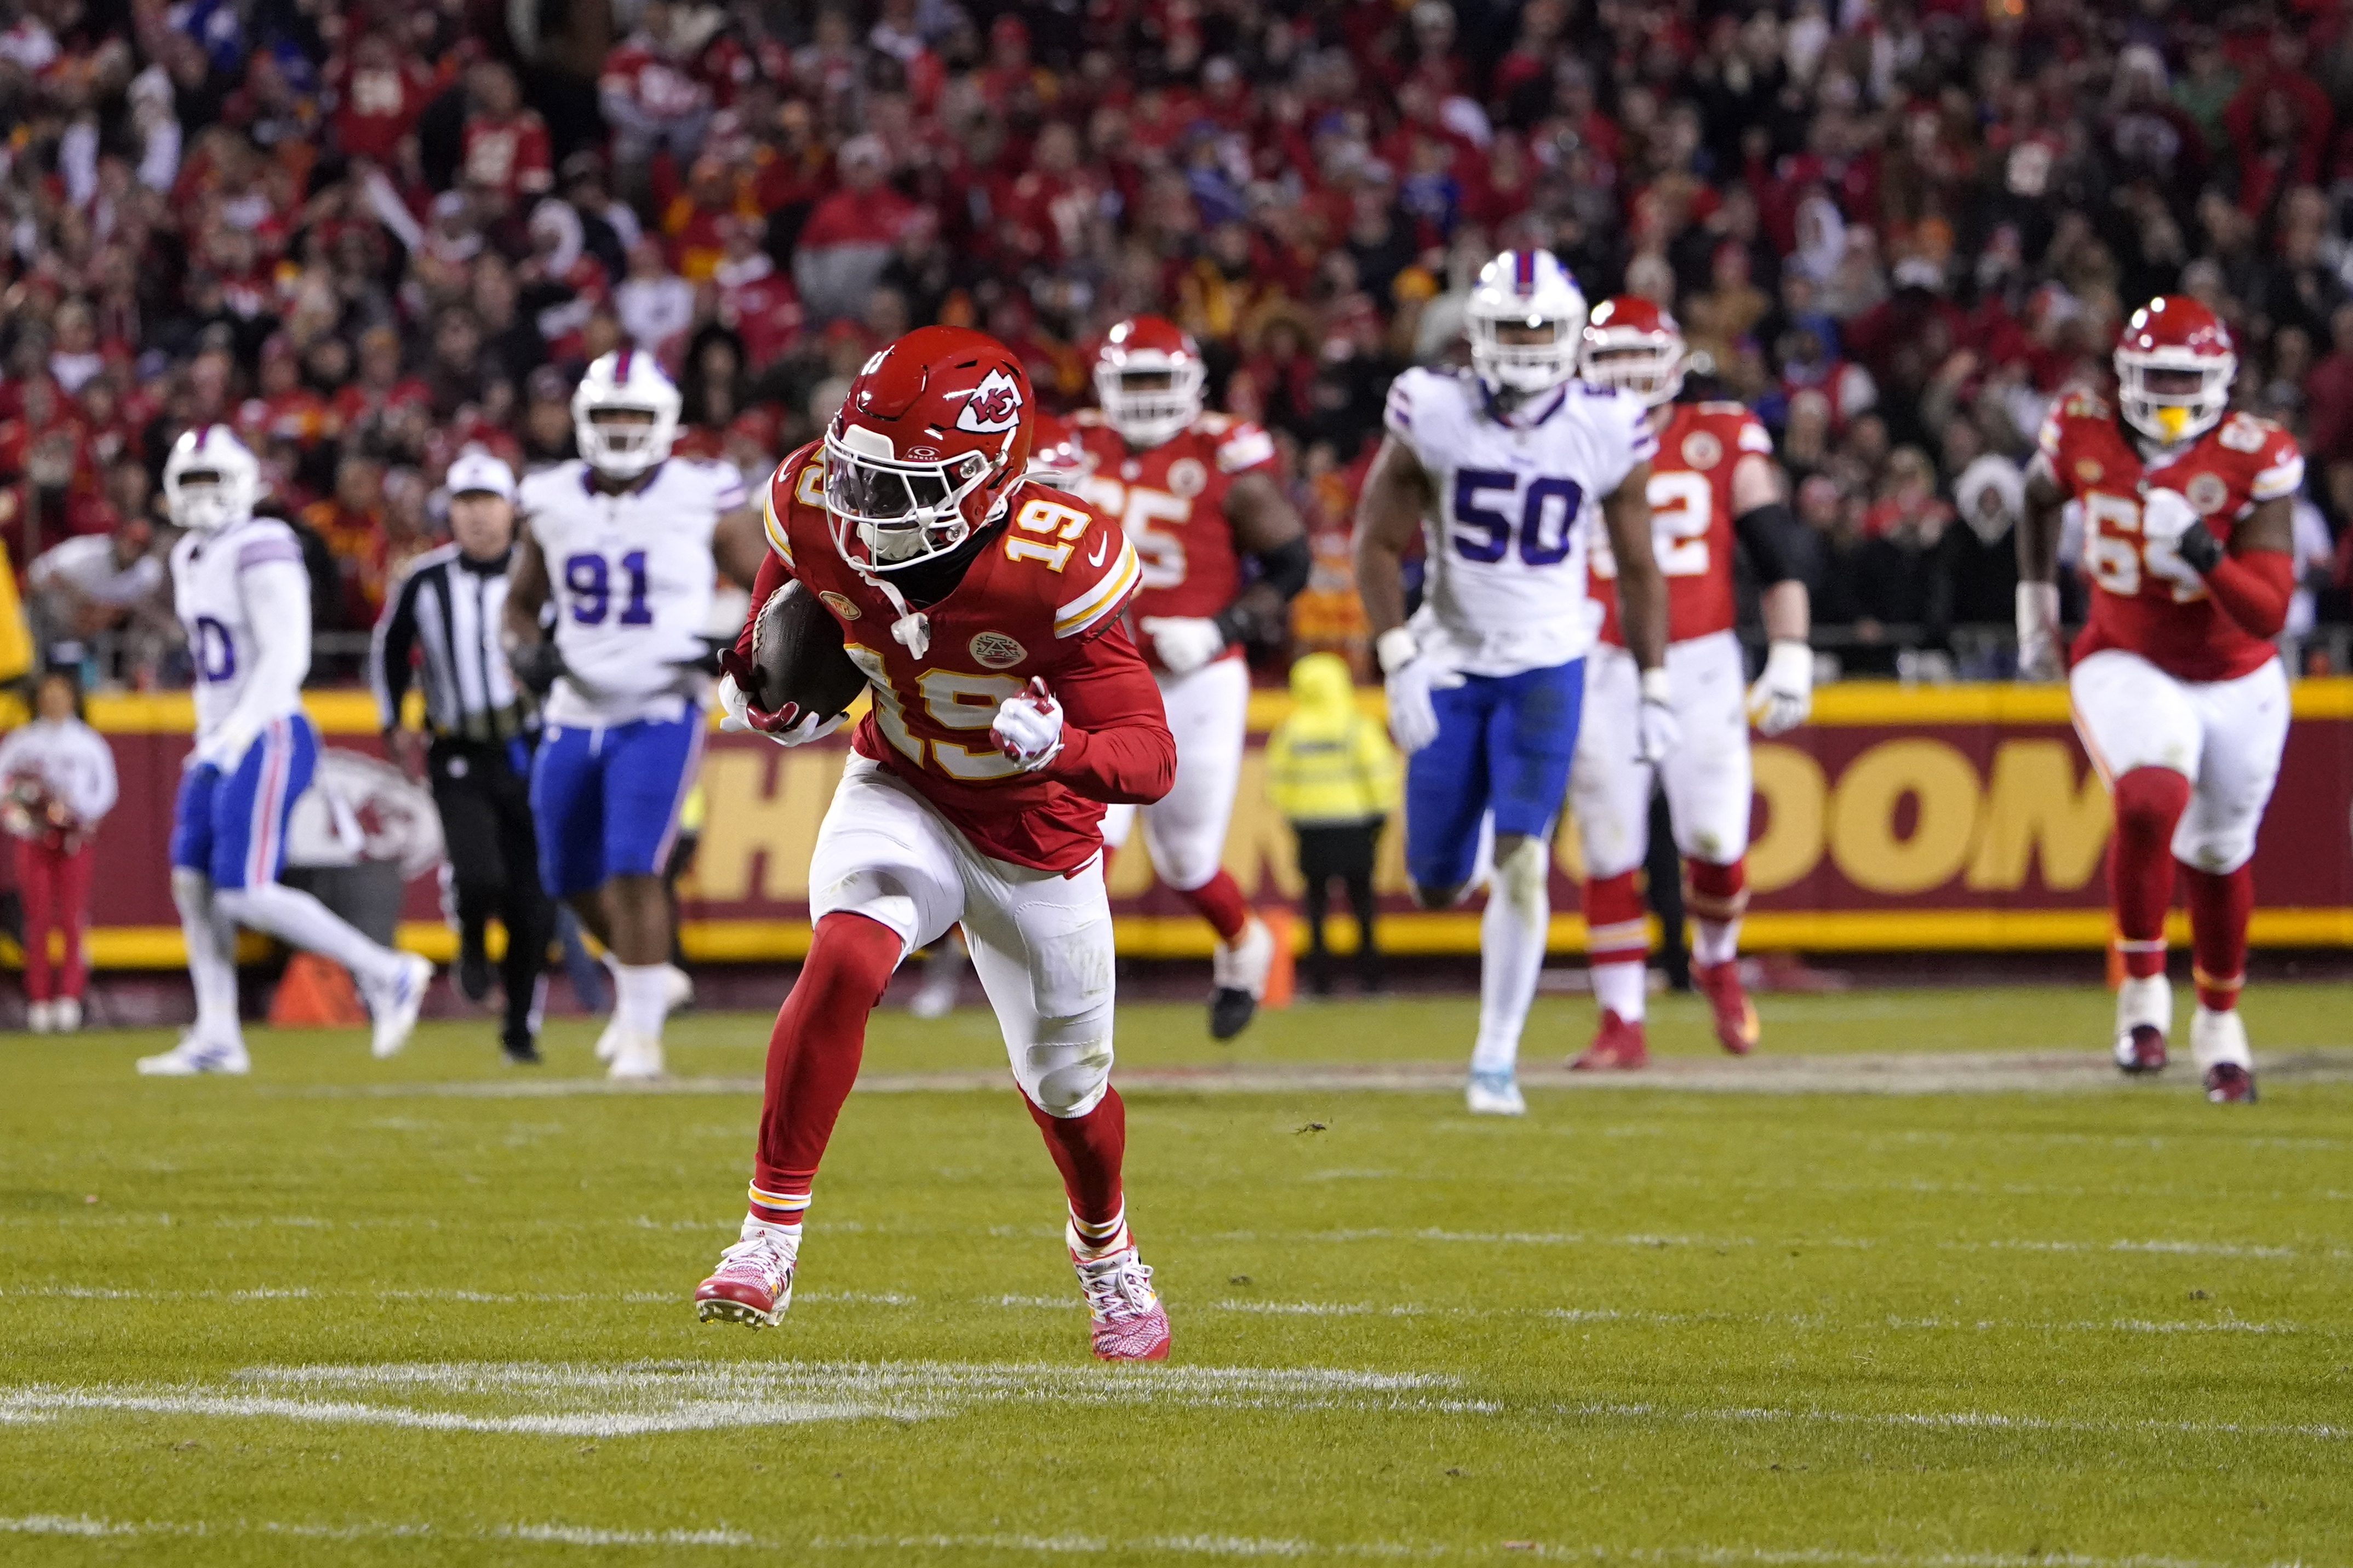 Chiefs missing Toney, McKinnon while Raiders could have Jacobs for